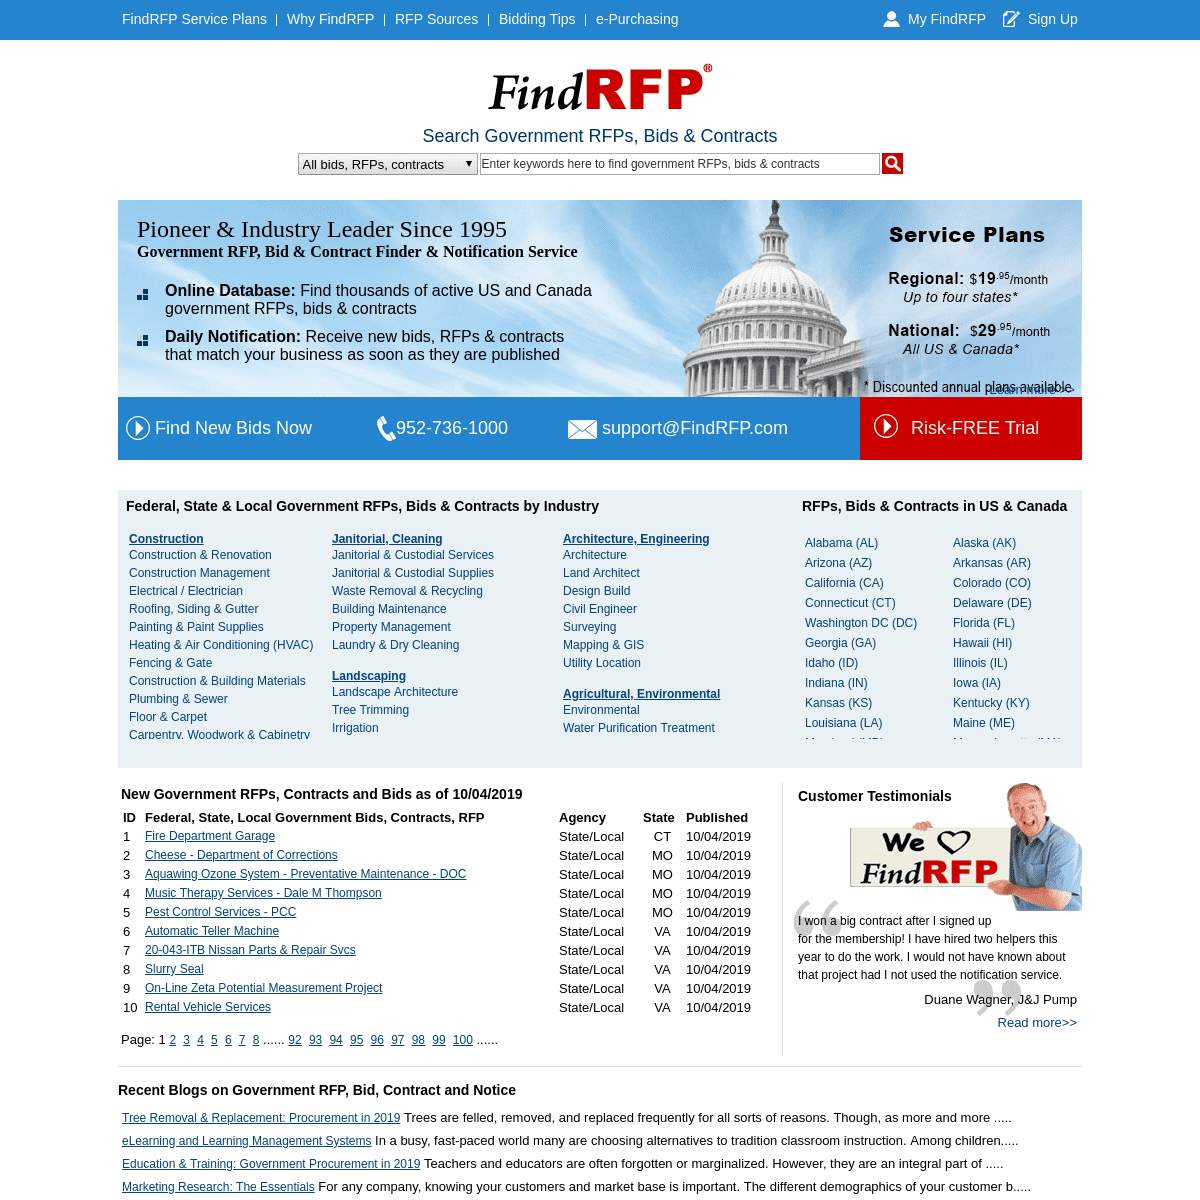 Government RFP, Federal, State Bids & Contracts, Request for Proposal | Find RFP